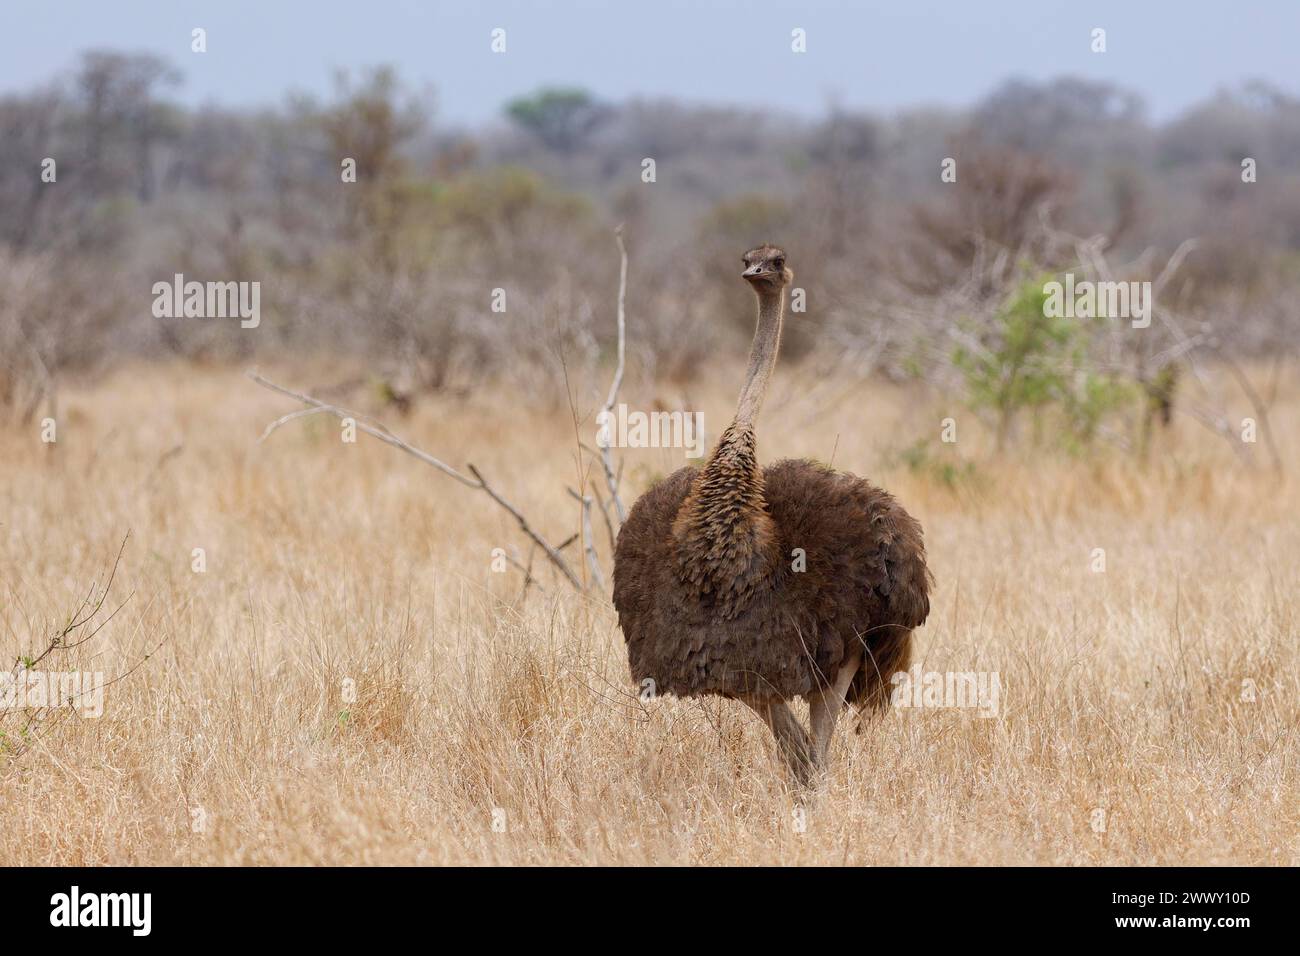 South African ostrich (Struthio camelus australis), adult female walking in dry grassland, facing camera, eye contact, Kruger National Park, South Afr Stock Photo